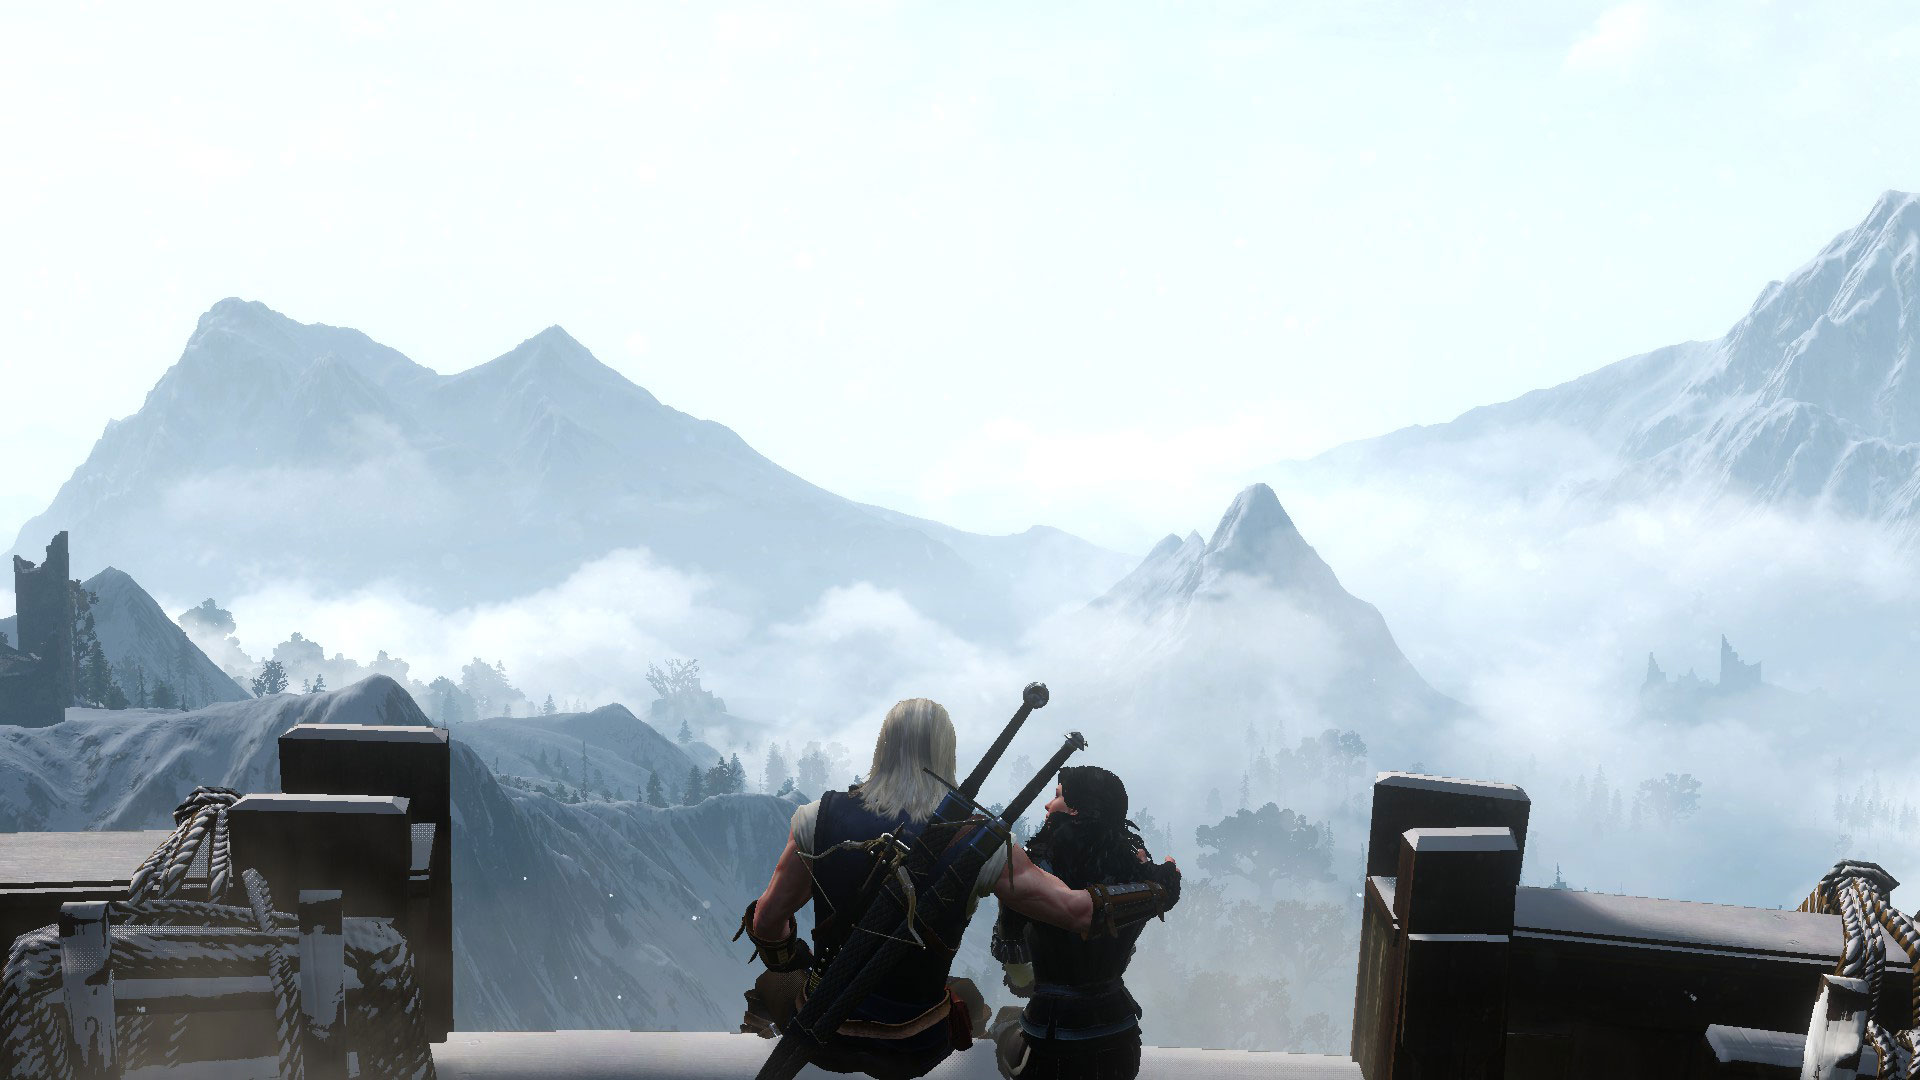 Geralt And Yennefer Enjoying The View